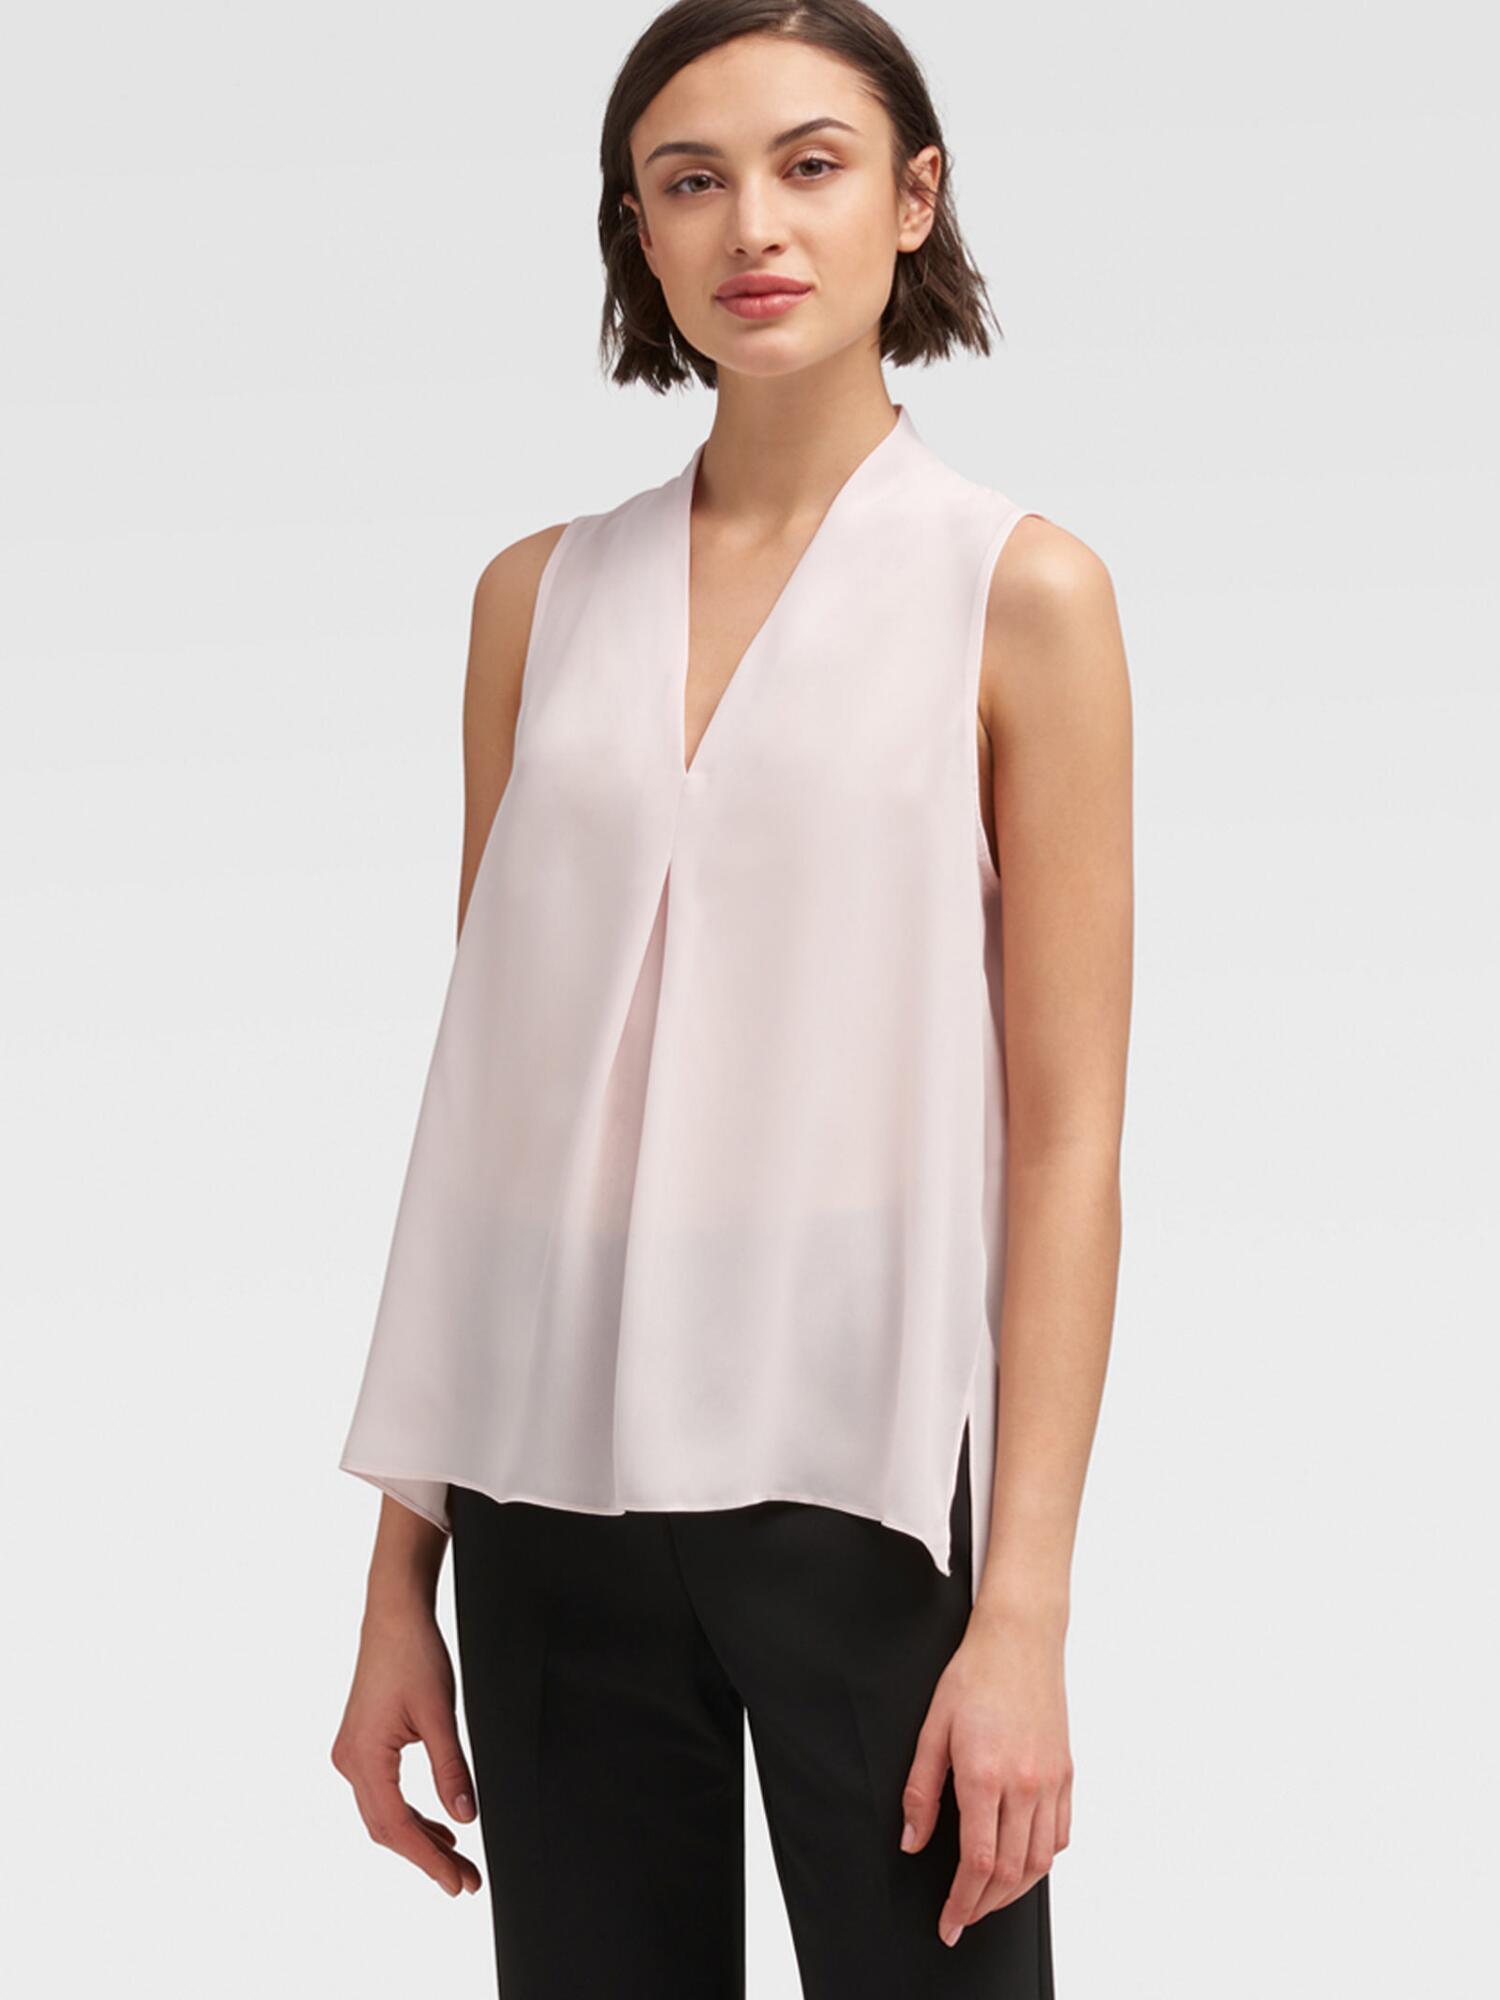 DKNY Synthetic Pleated-front Tank Top in Light Pink (Pink) - Lyst